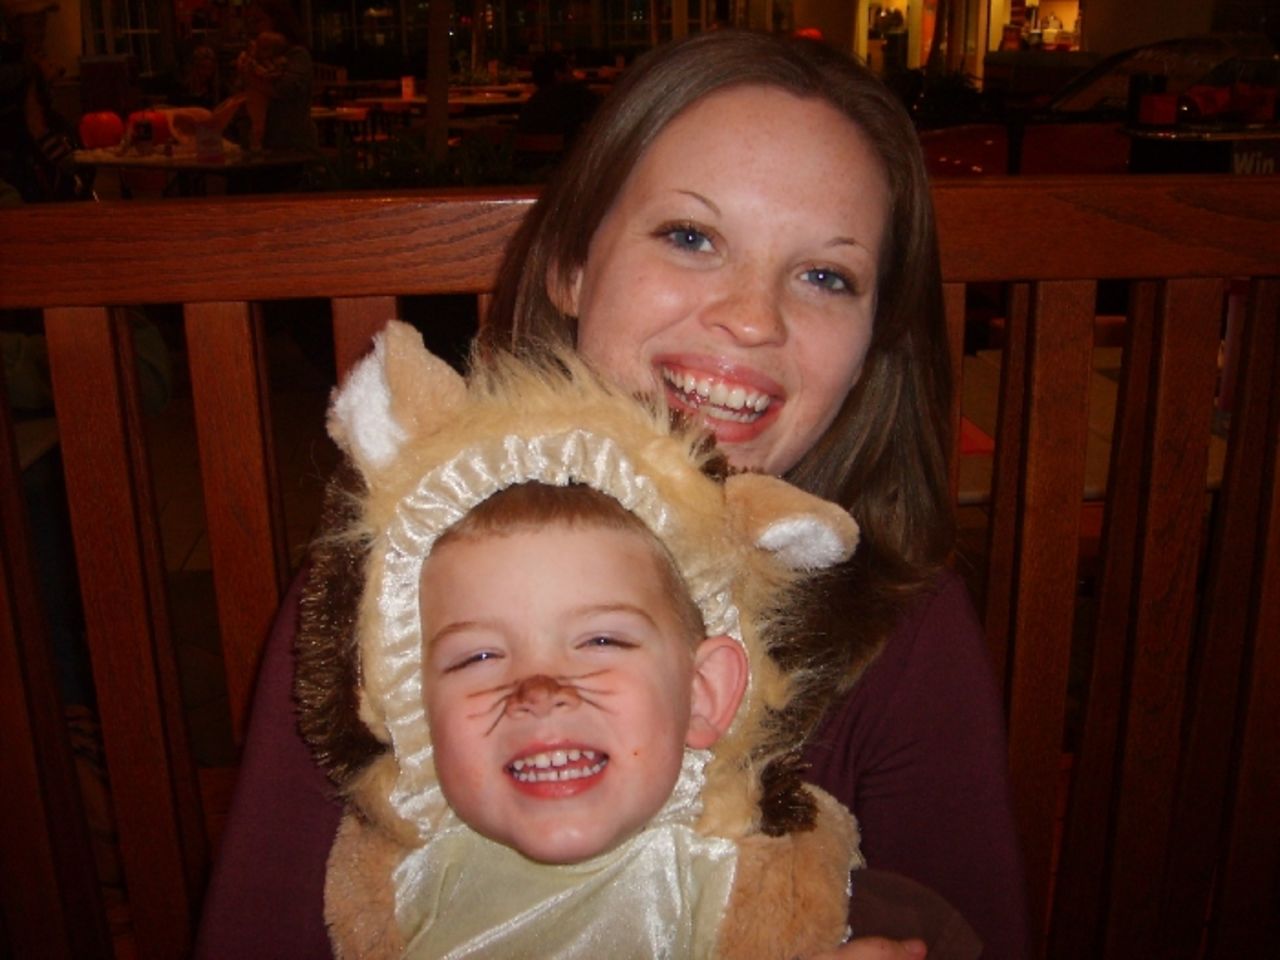 "Trick-or-treating is always one of those events that makes me happy to only have one child to keep track of and keep safe," said Crookston, shown here with her son in October 2007.